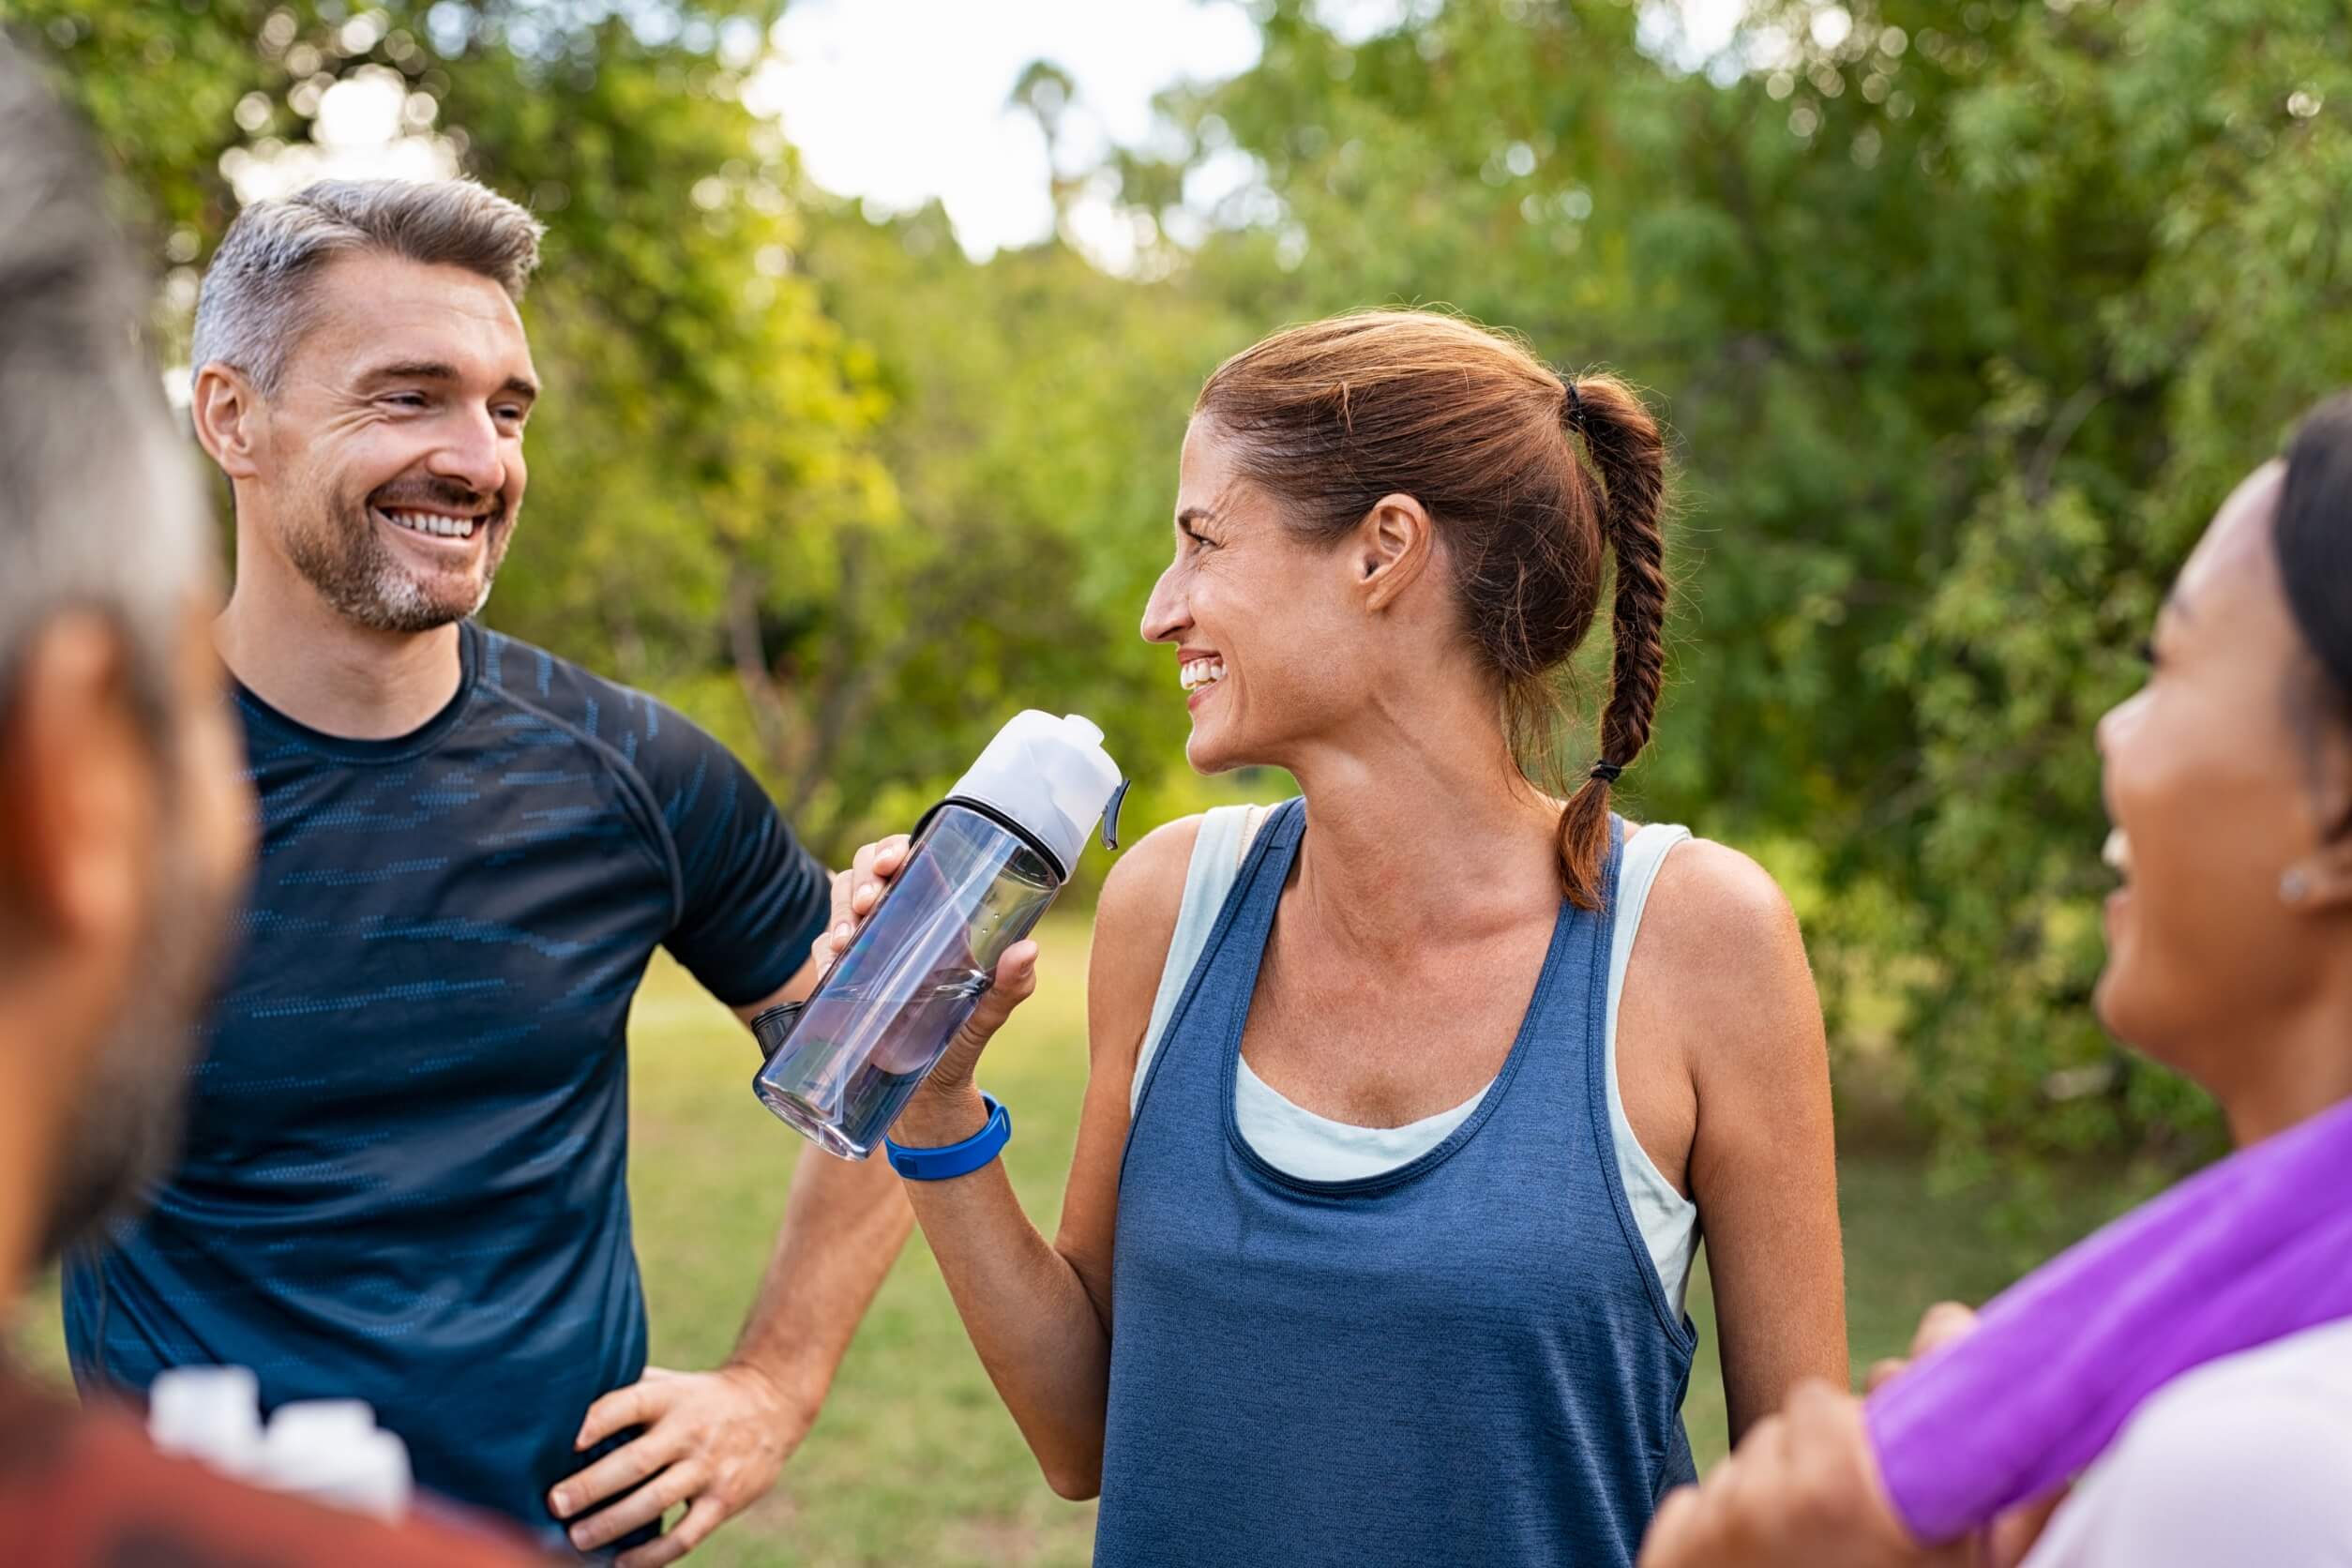 Spring into Action: Outdoor Activities to Promote Heart Health